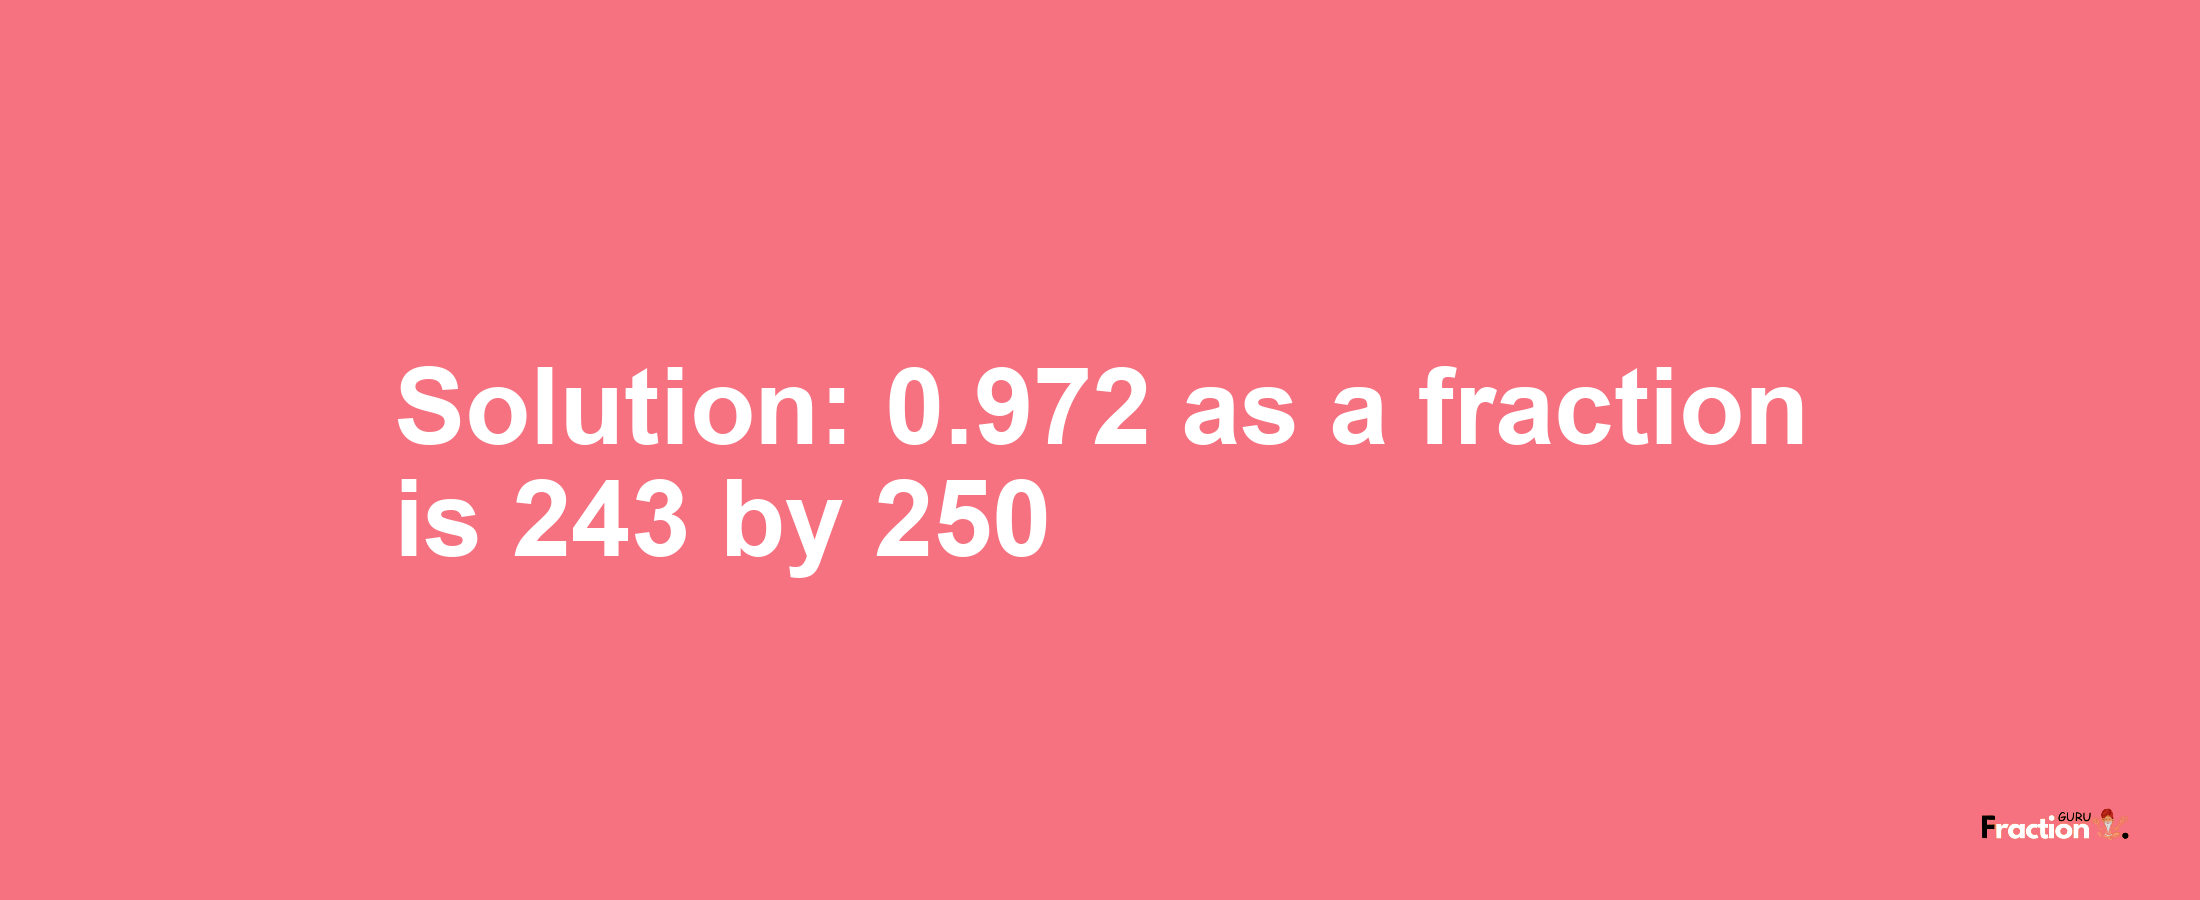 Solution:0.972 as a fraction is 243/250